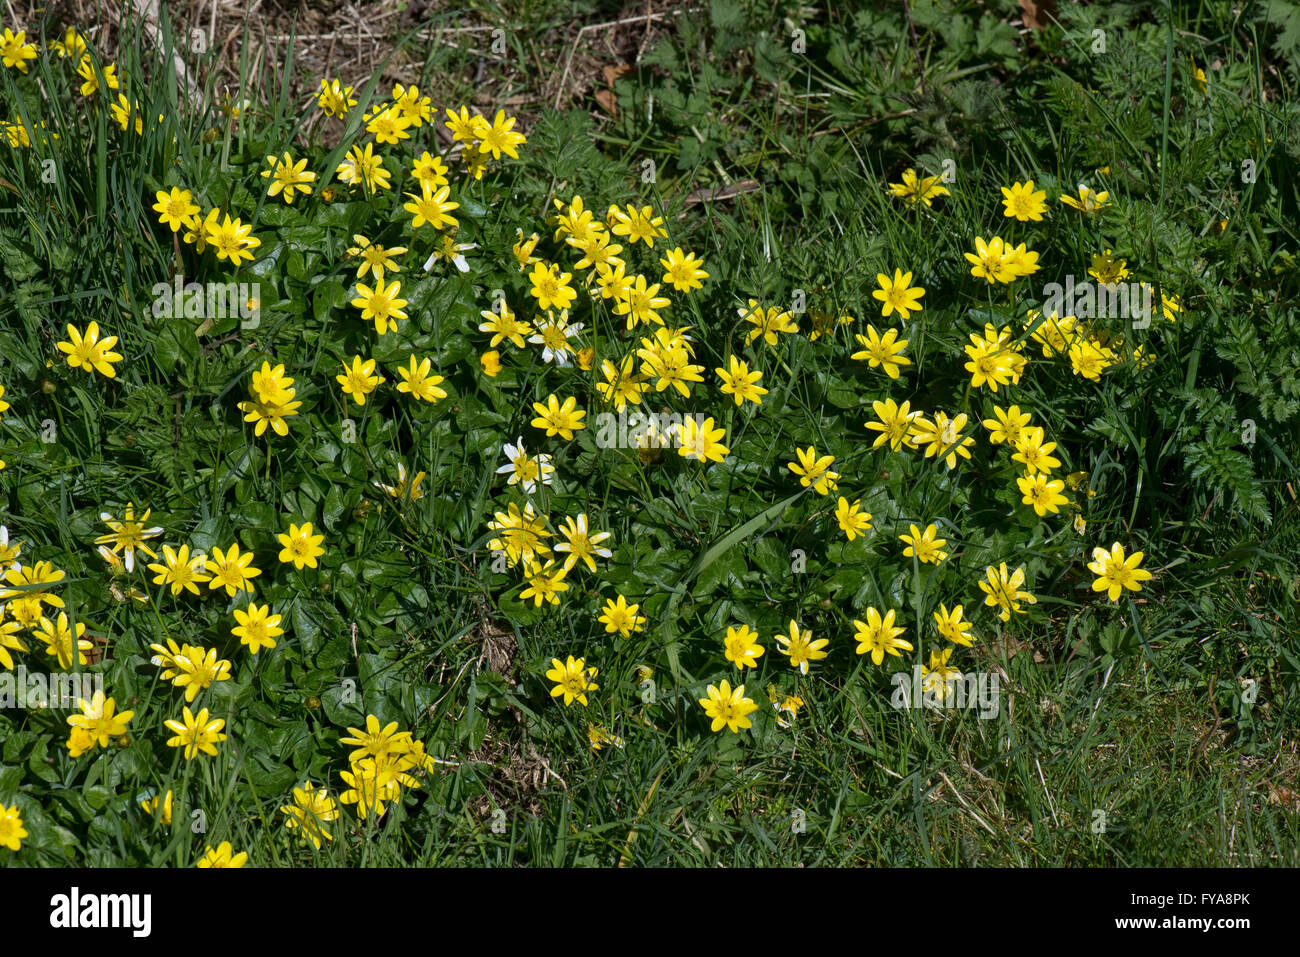 Lesser celandines, Ficaria verna, yellow flowering spring buttercup-like plant Stock Photo